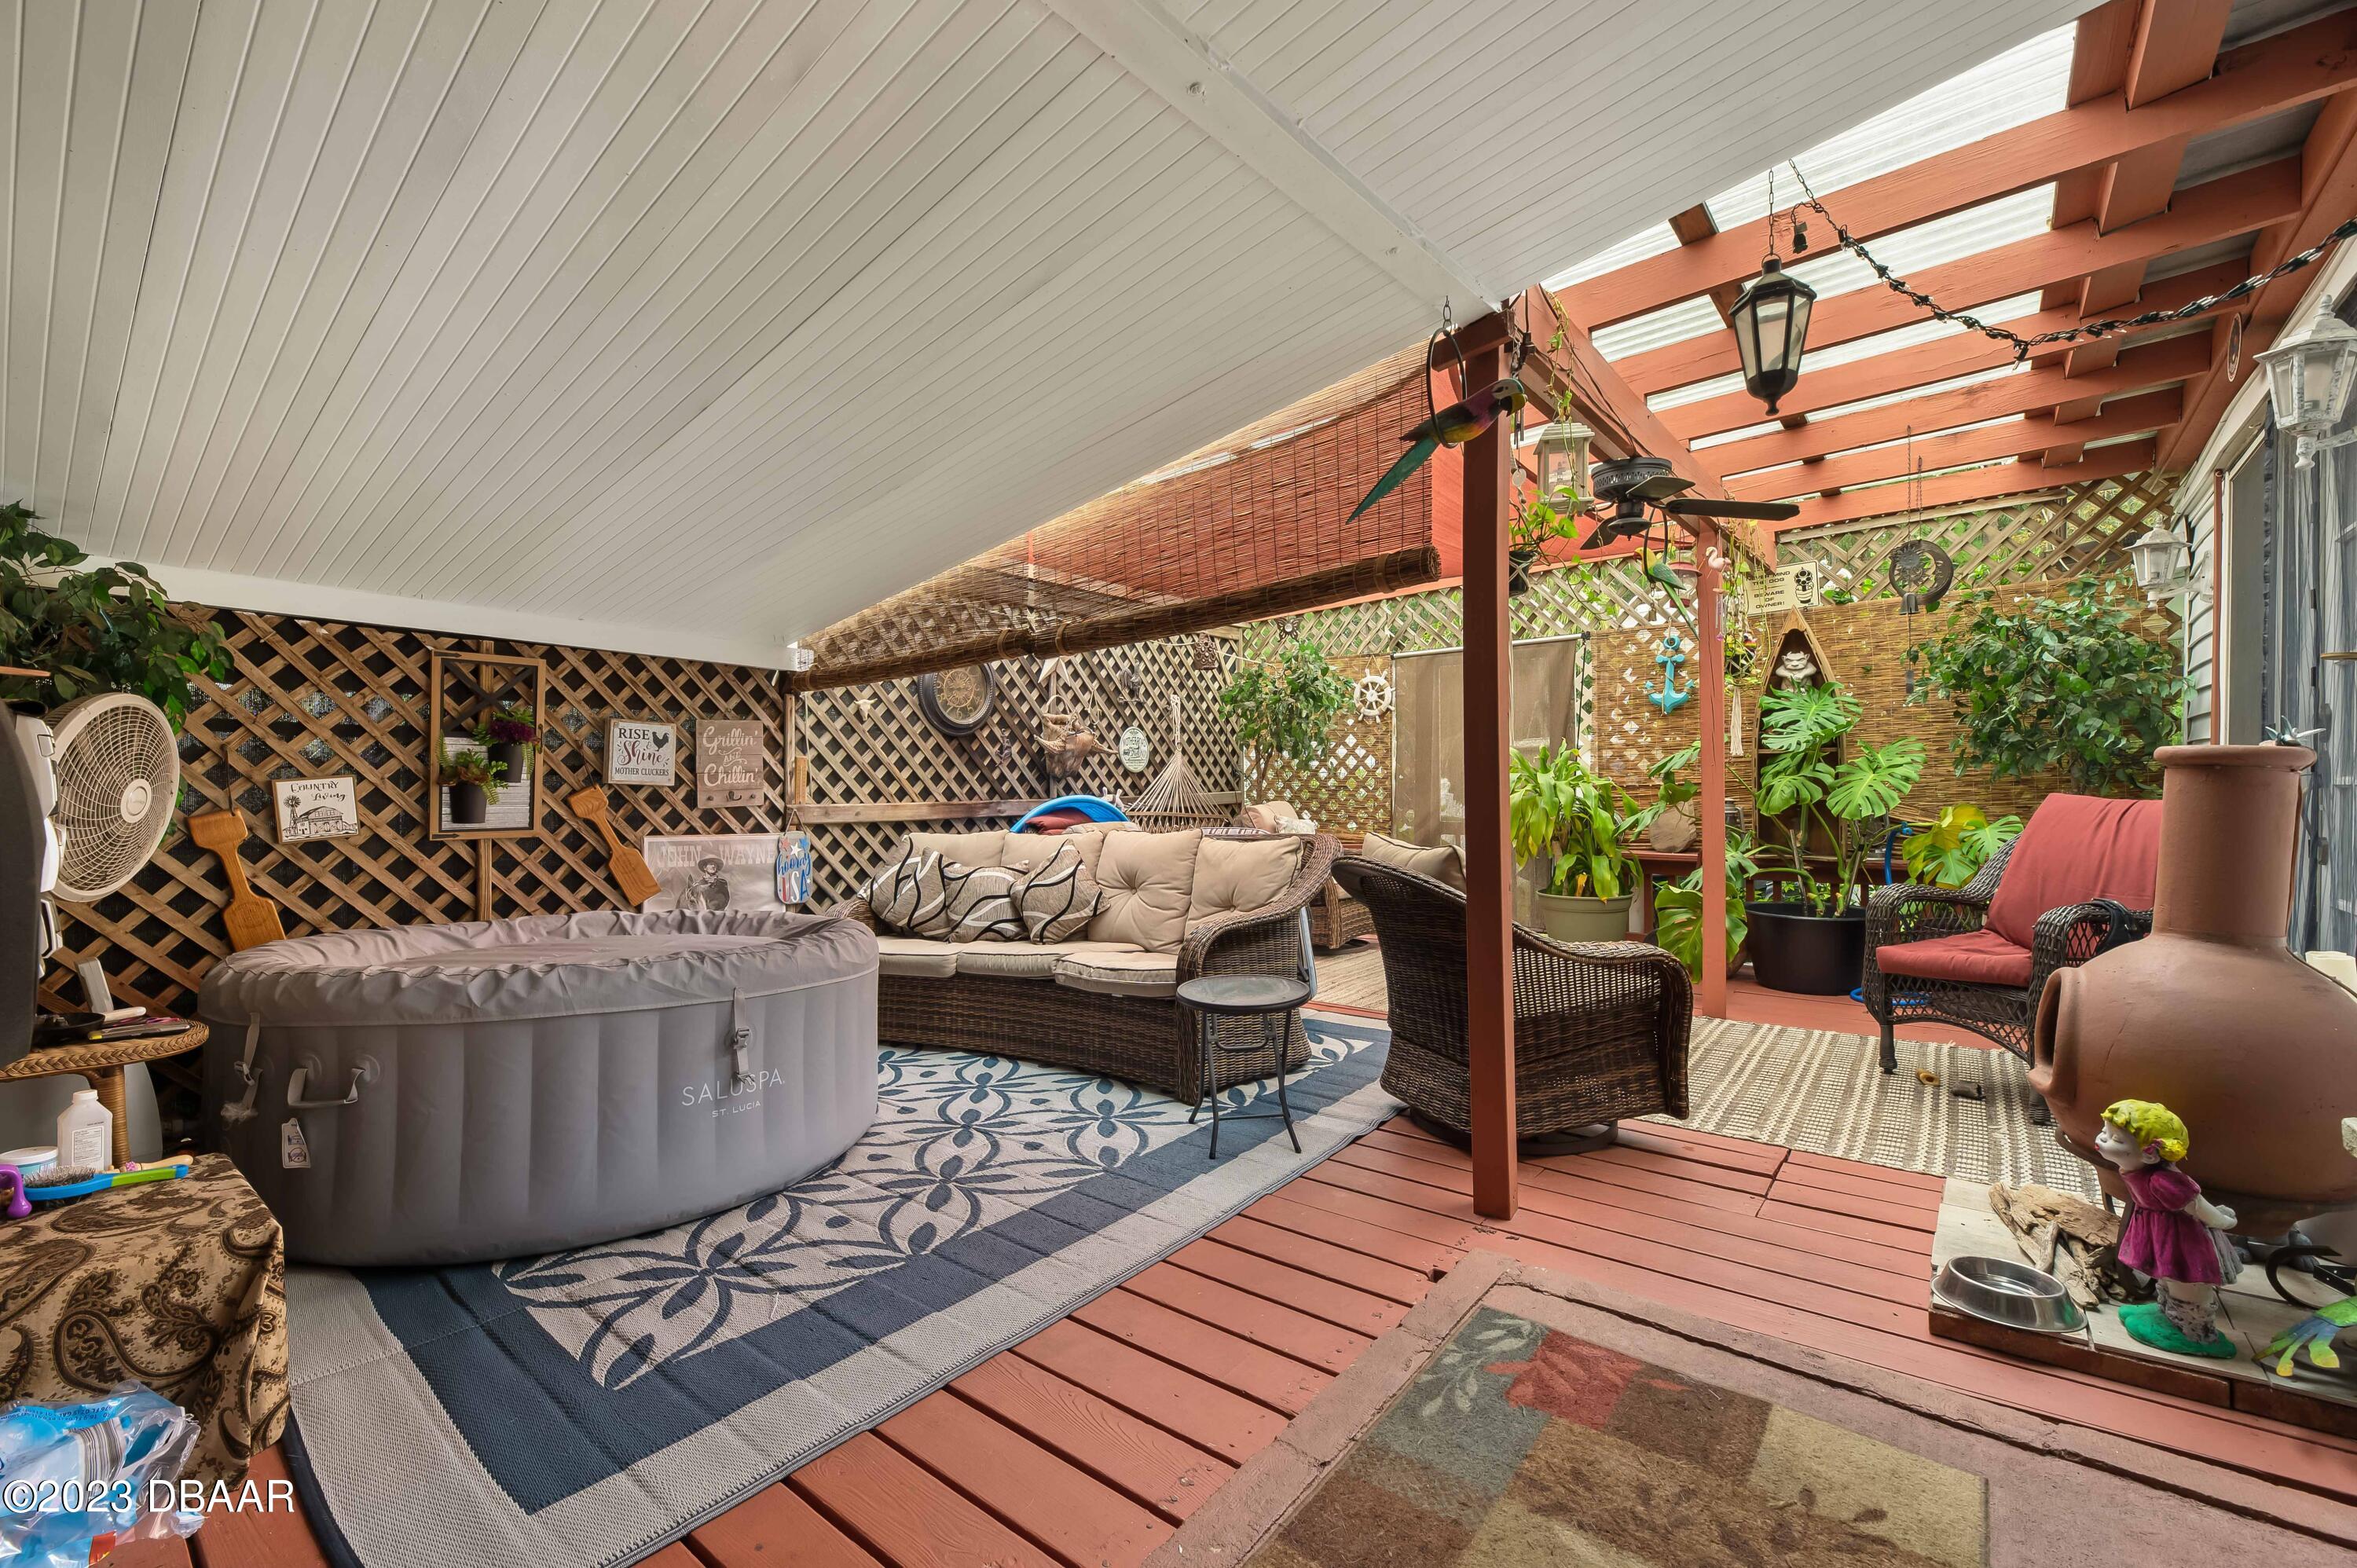 a outdoor living space with patio furniture and a potted plant